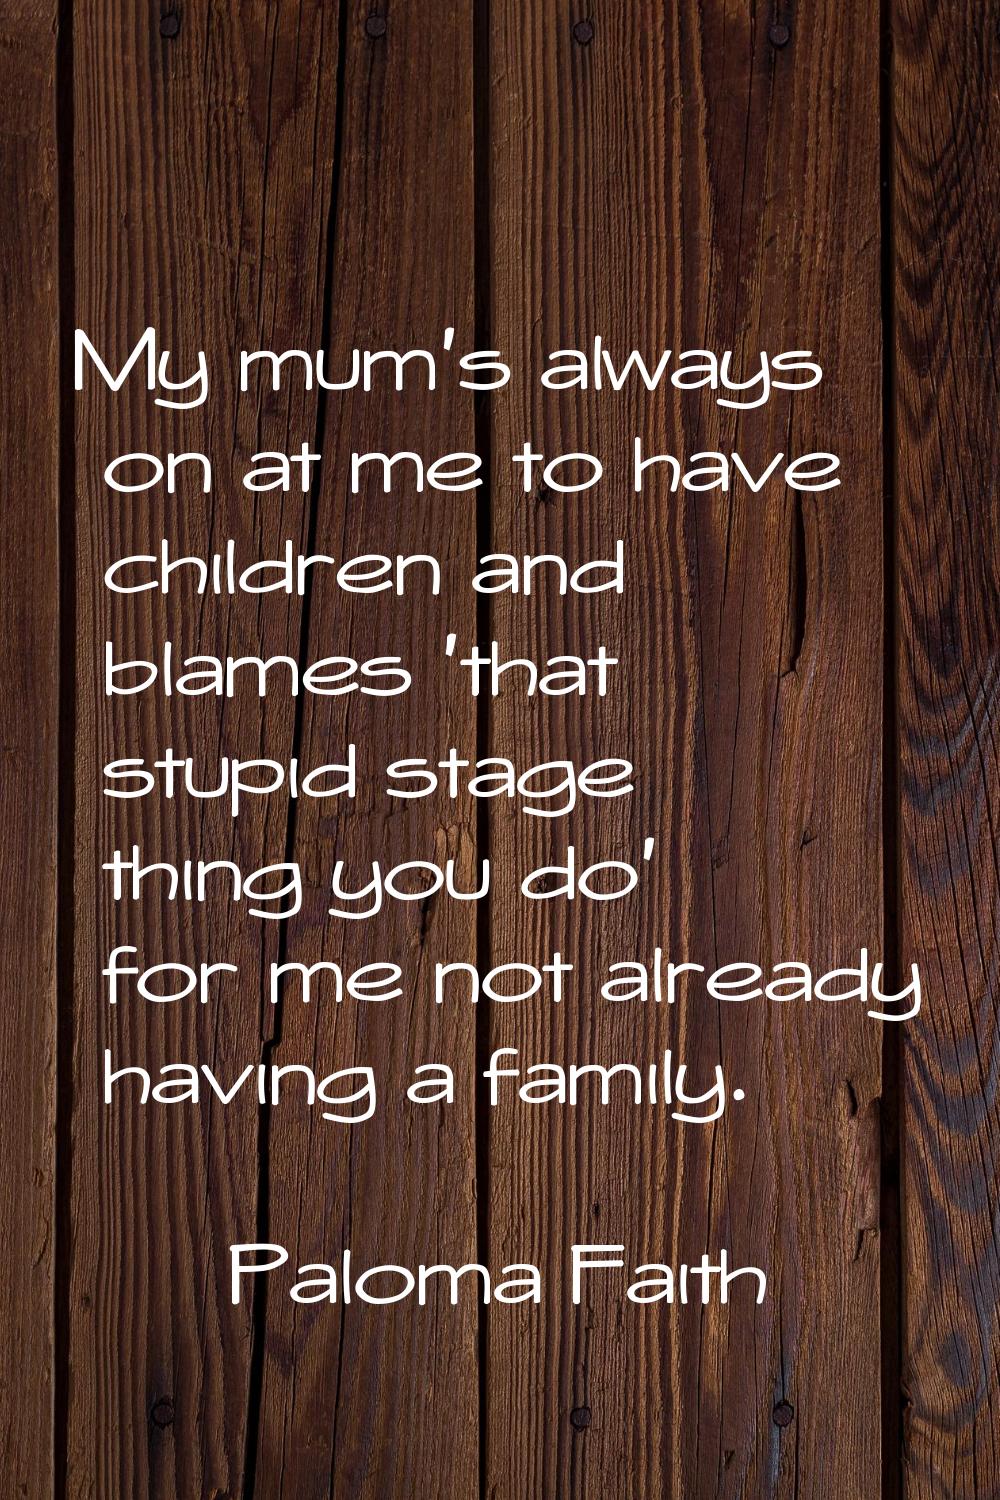 My mum's always on at me to have children and blames 'that stupid stage thing you do' for me not al